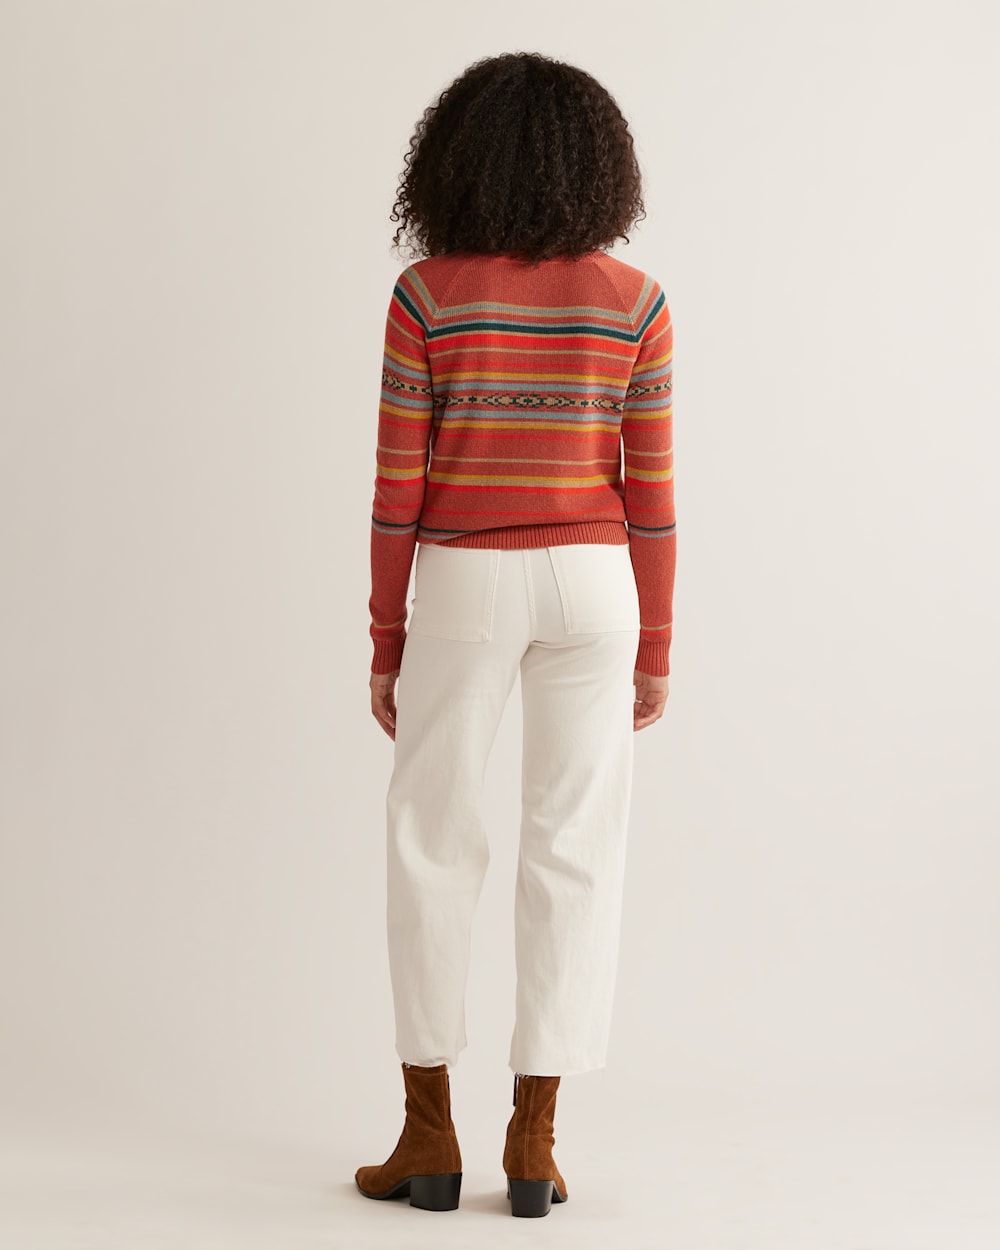 ALTERNATE VIEW OF WOMEN'S RAGLAN COTTON GRAPHIC SWEATER IN RED MULTI STRIPE image number 3